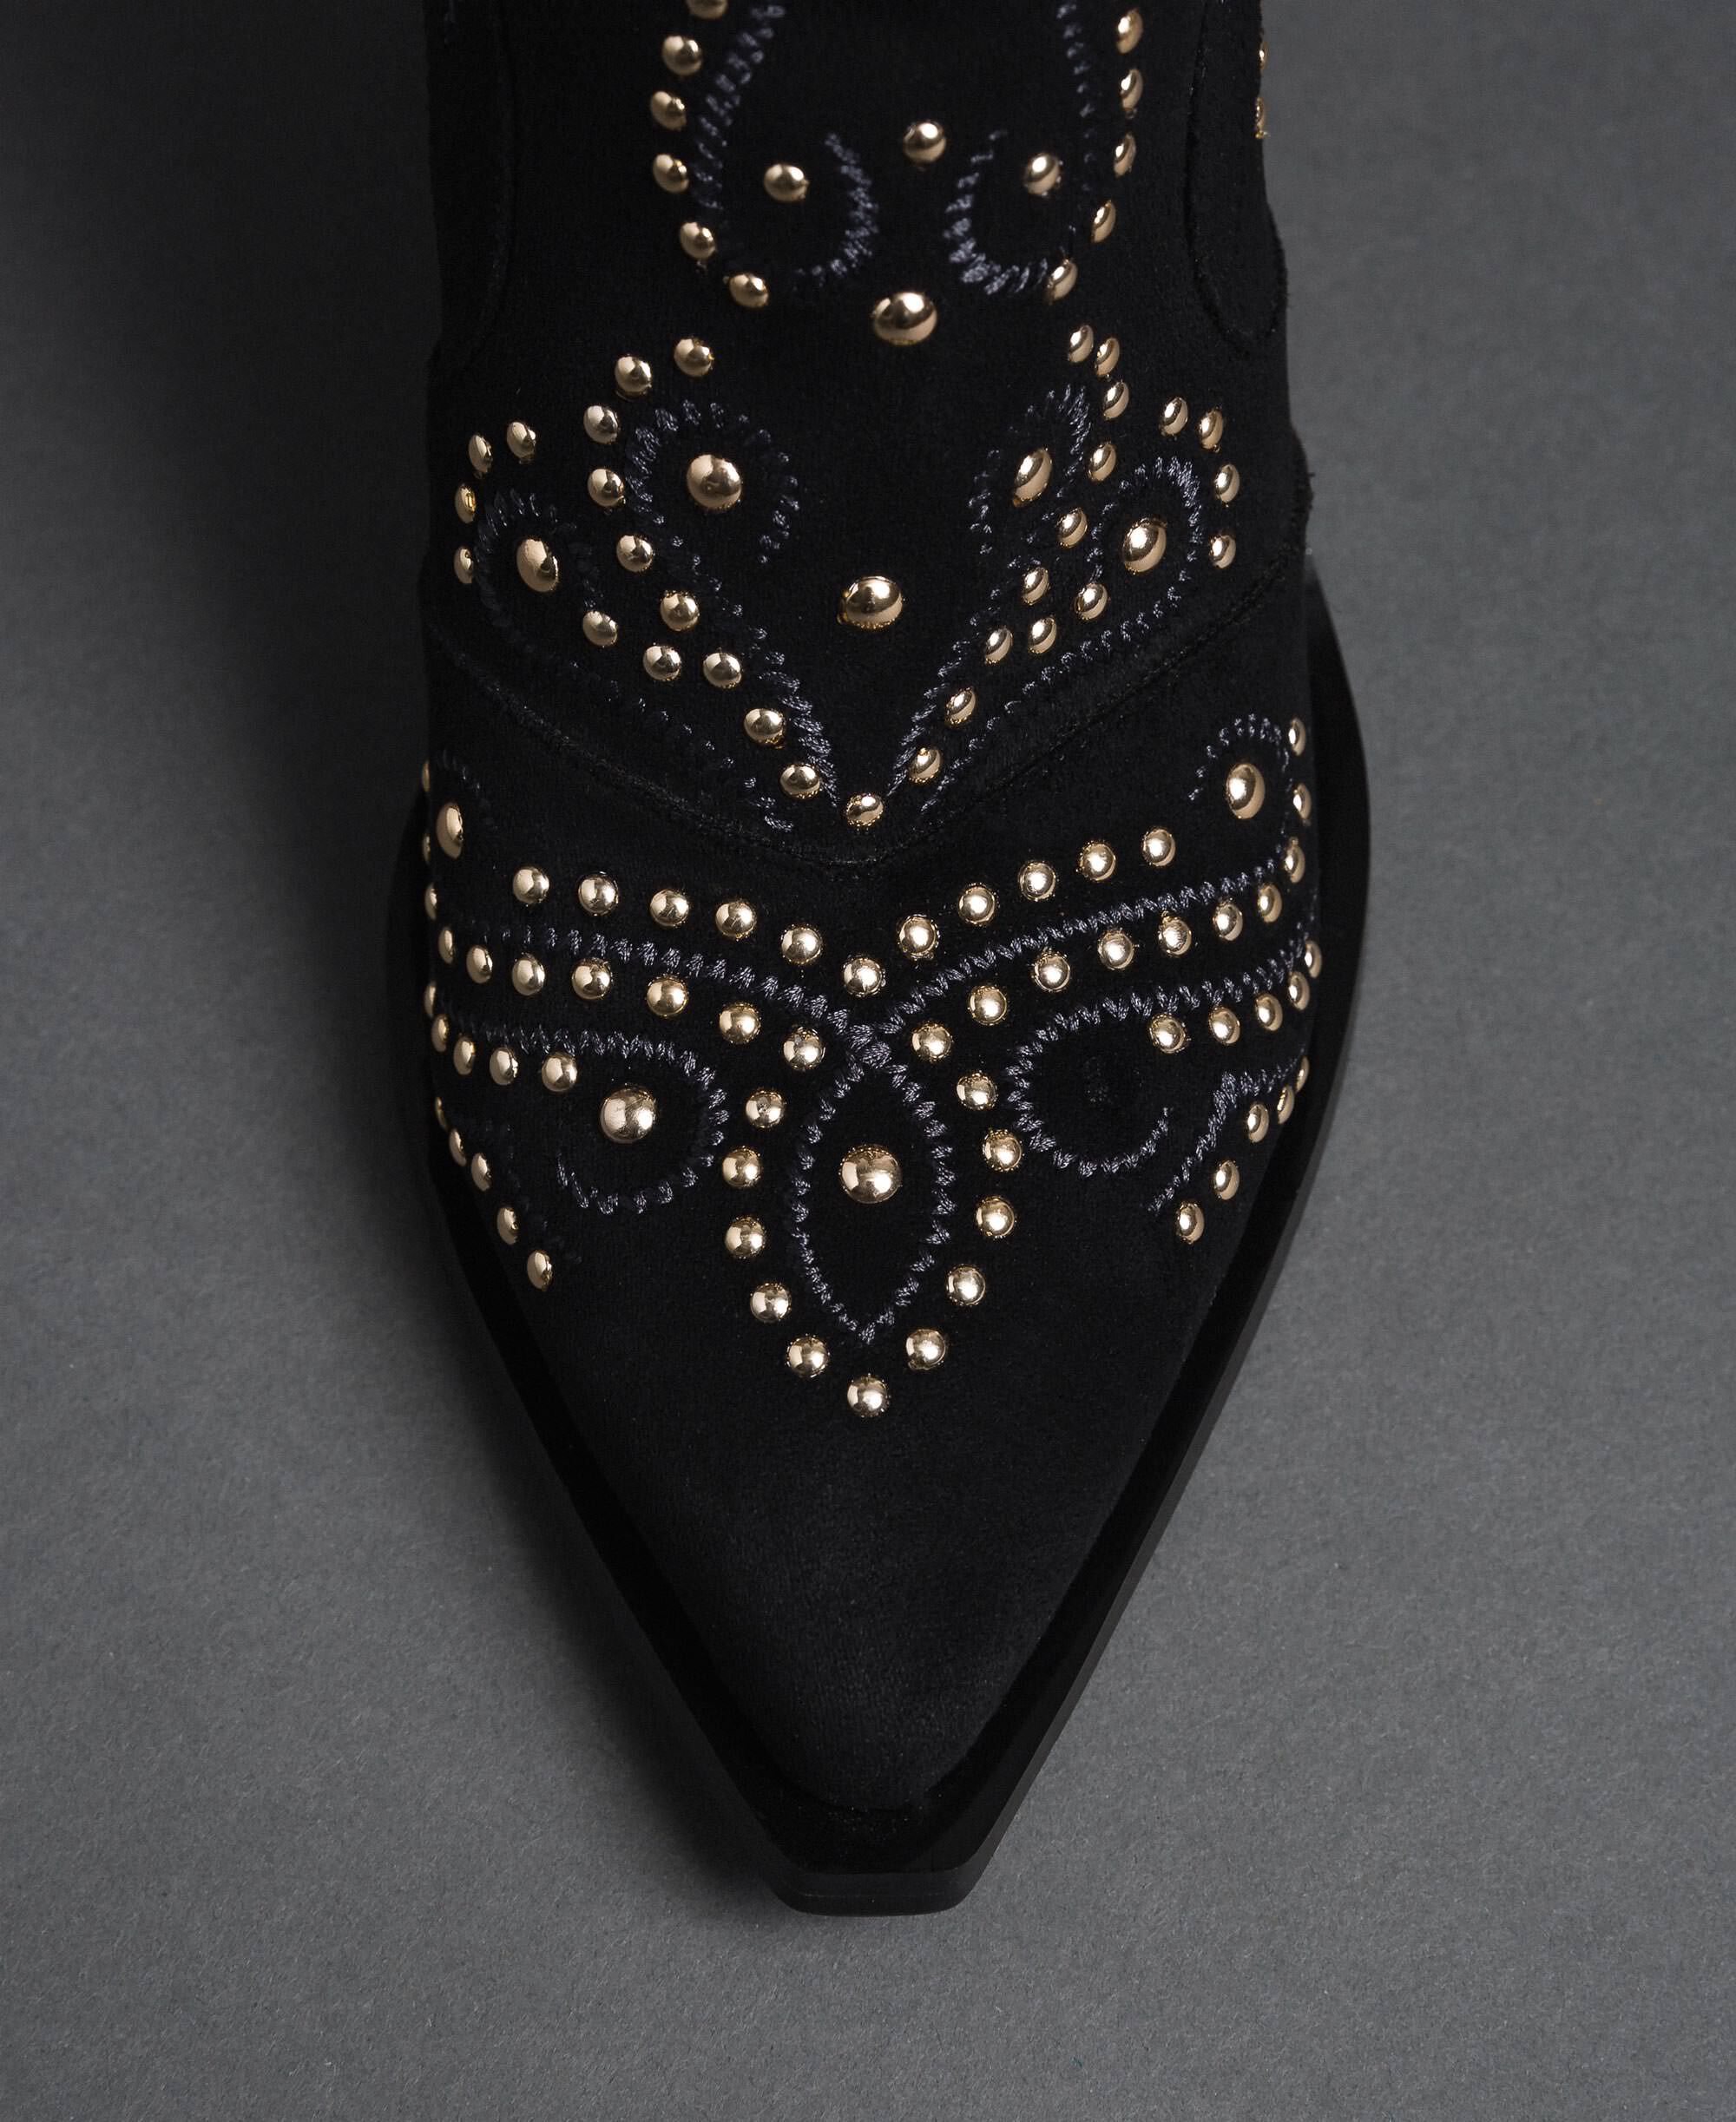 studded ankle boots black